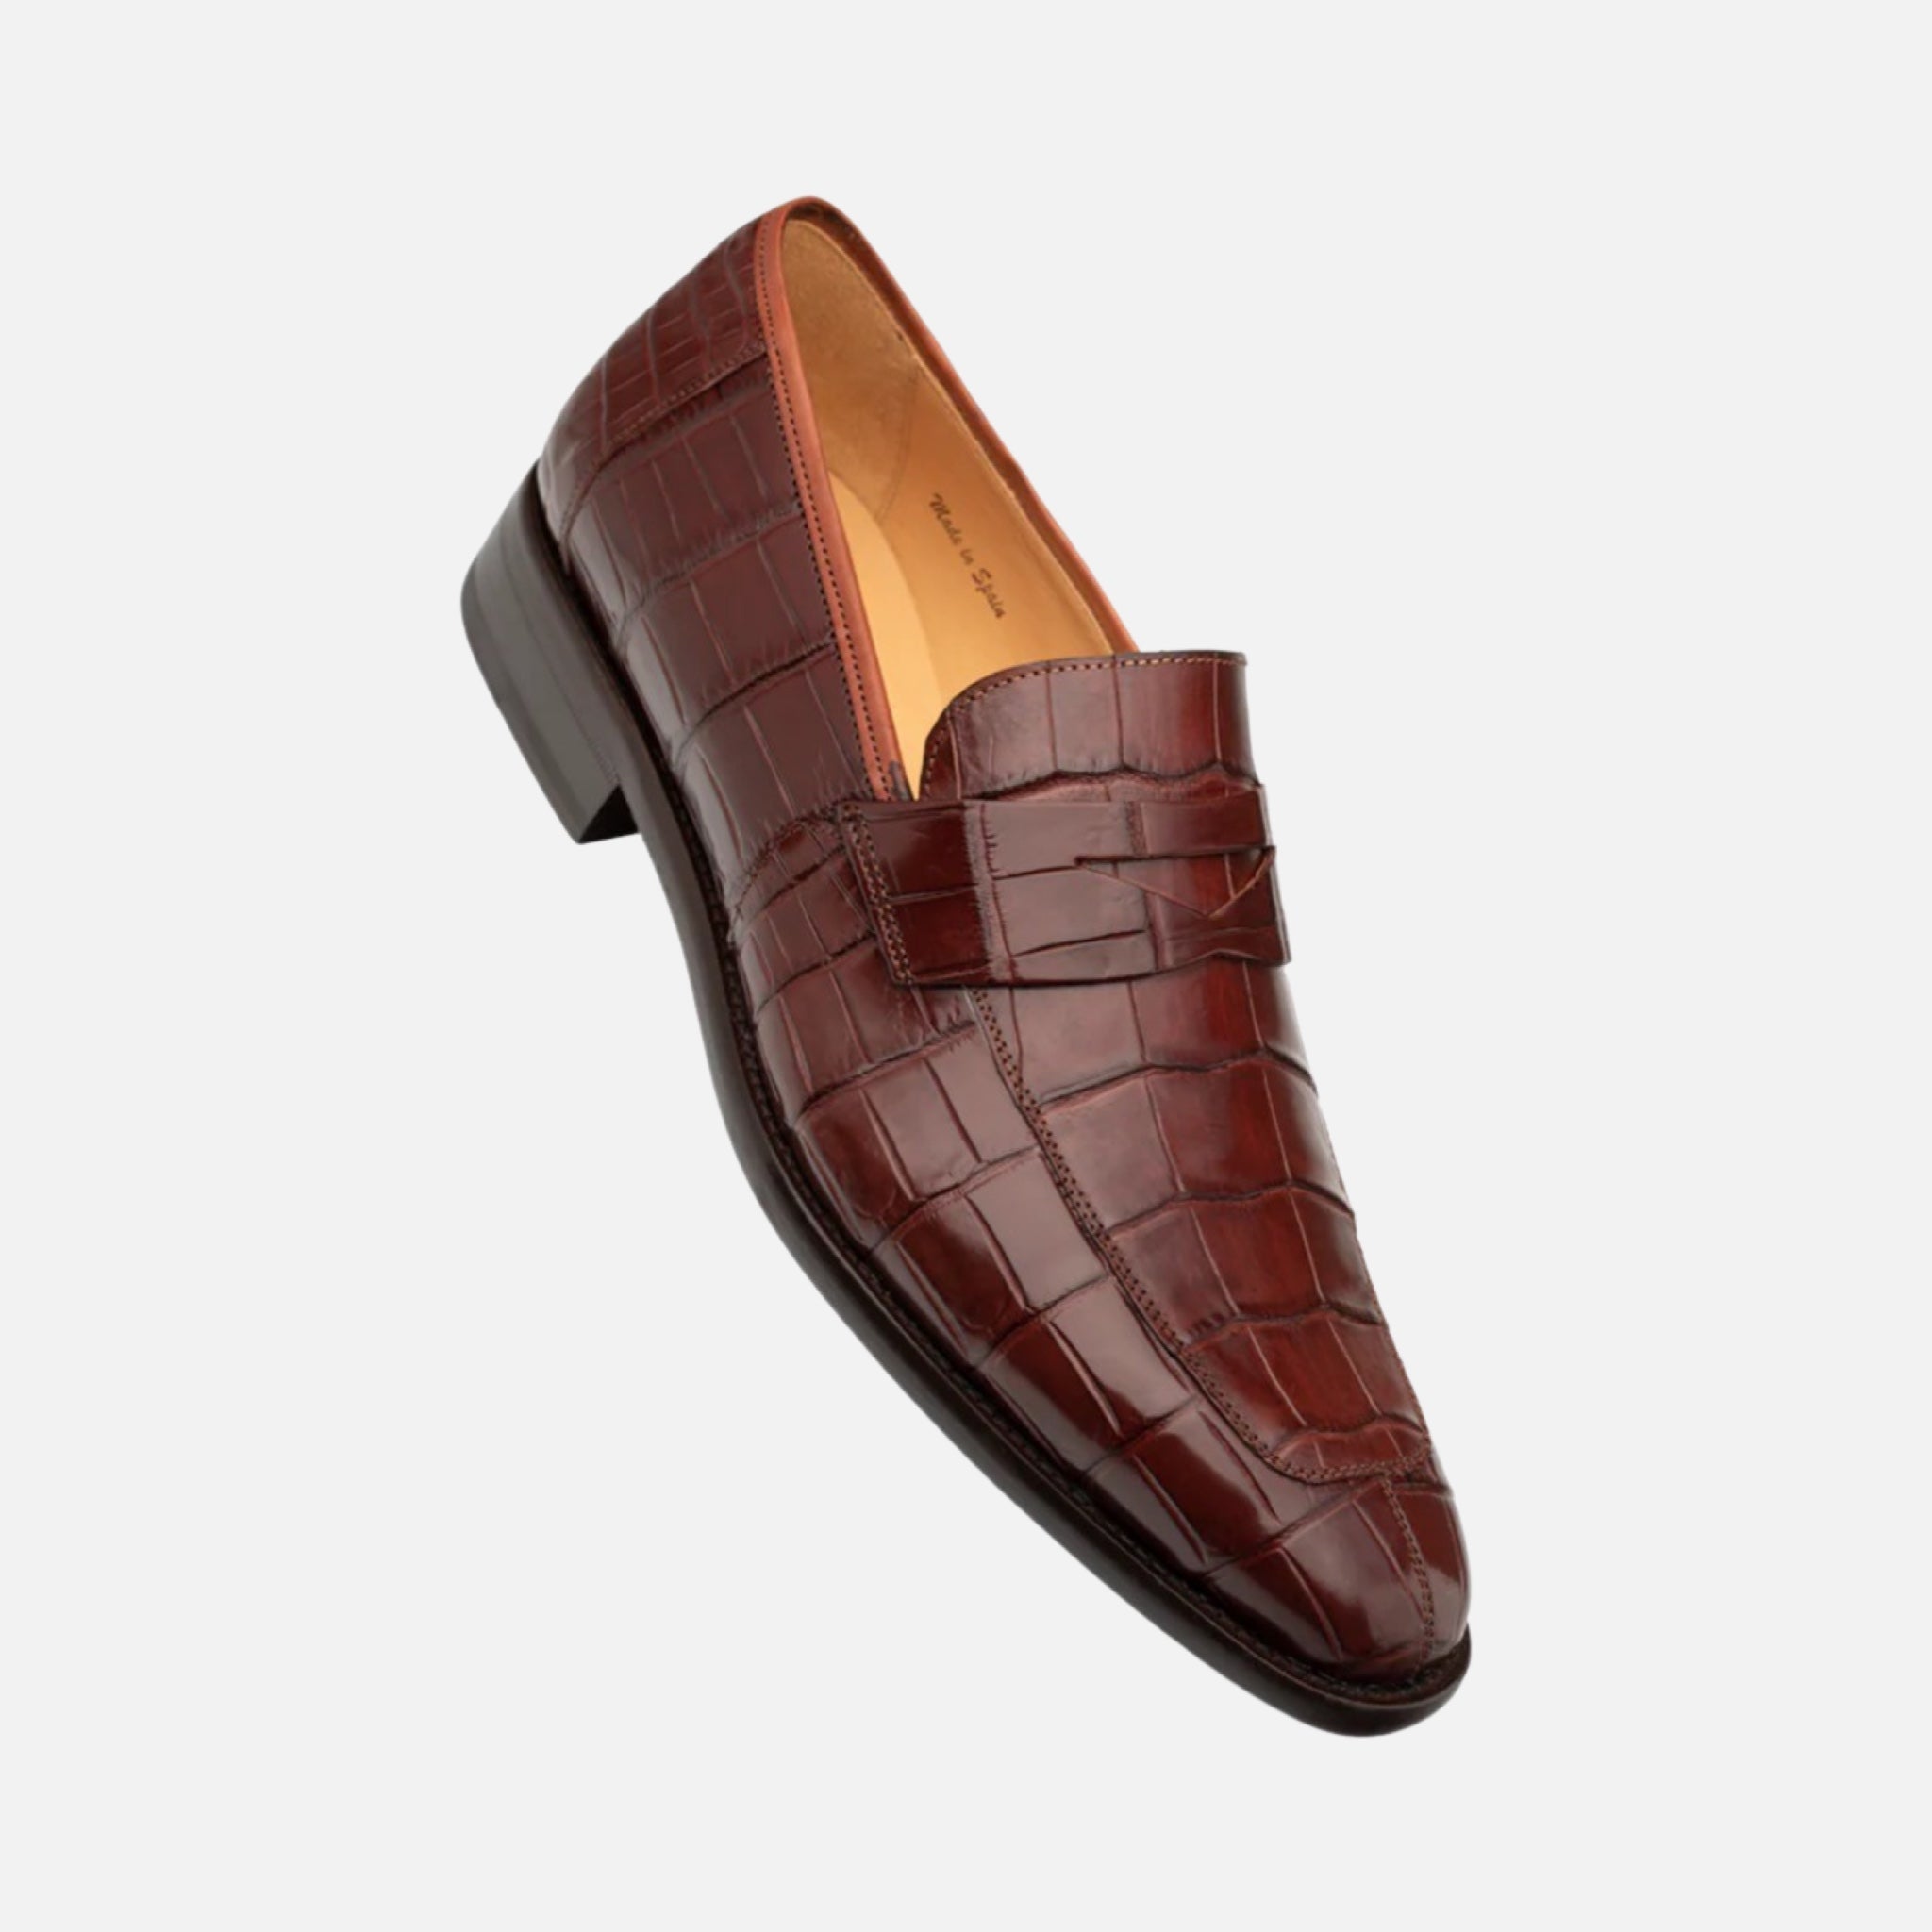 Mezlan Piccolo 'Sport' Alligator Penny Loafer - Handcrafted in Spain